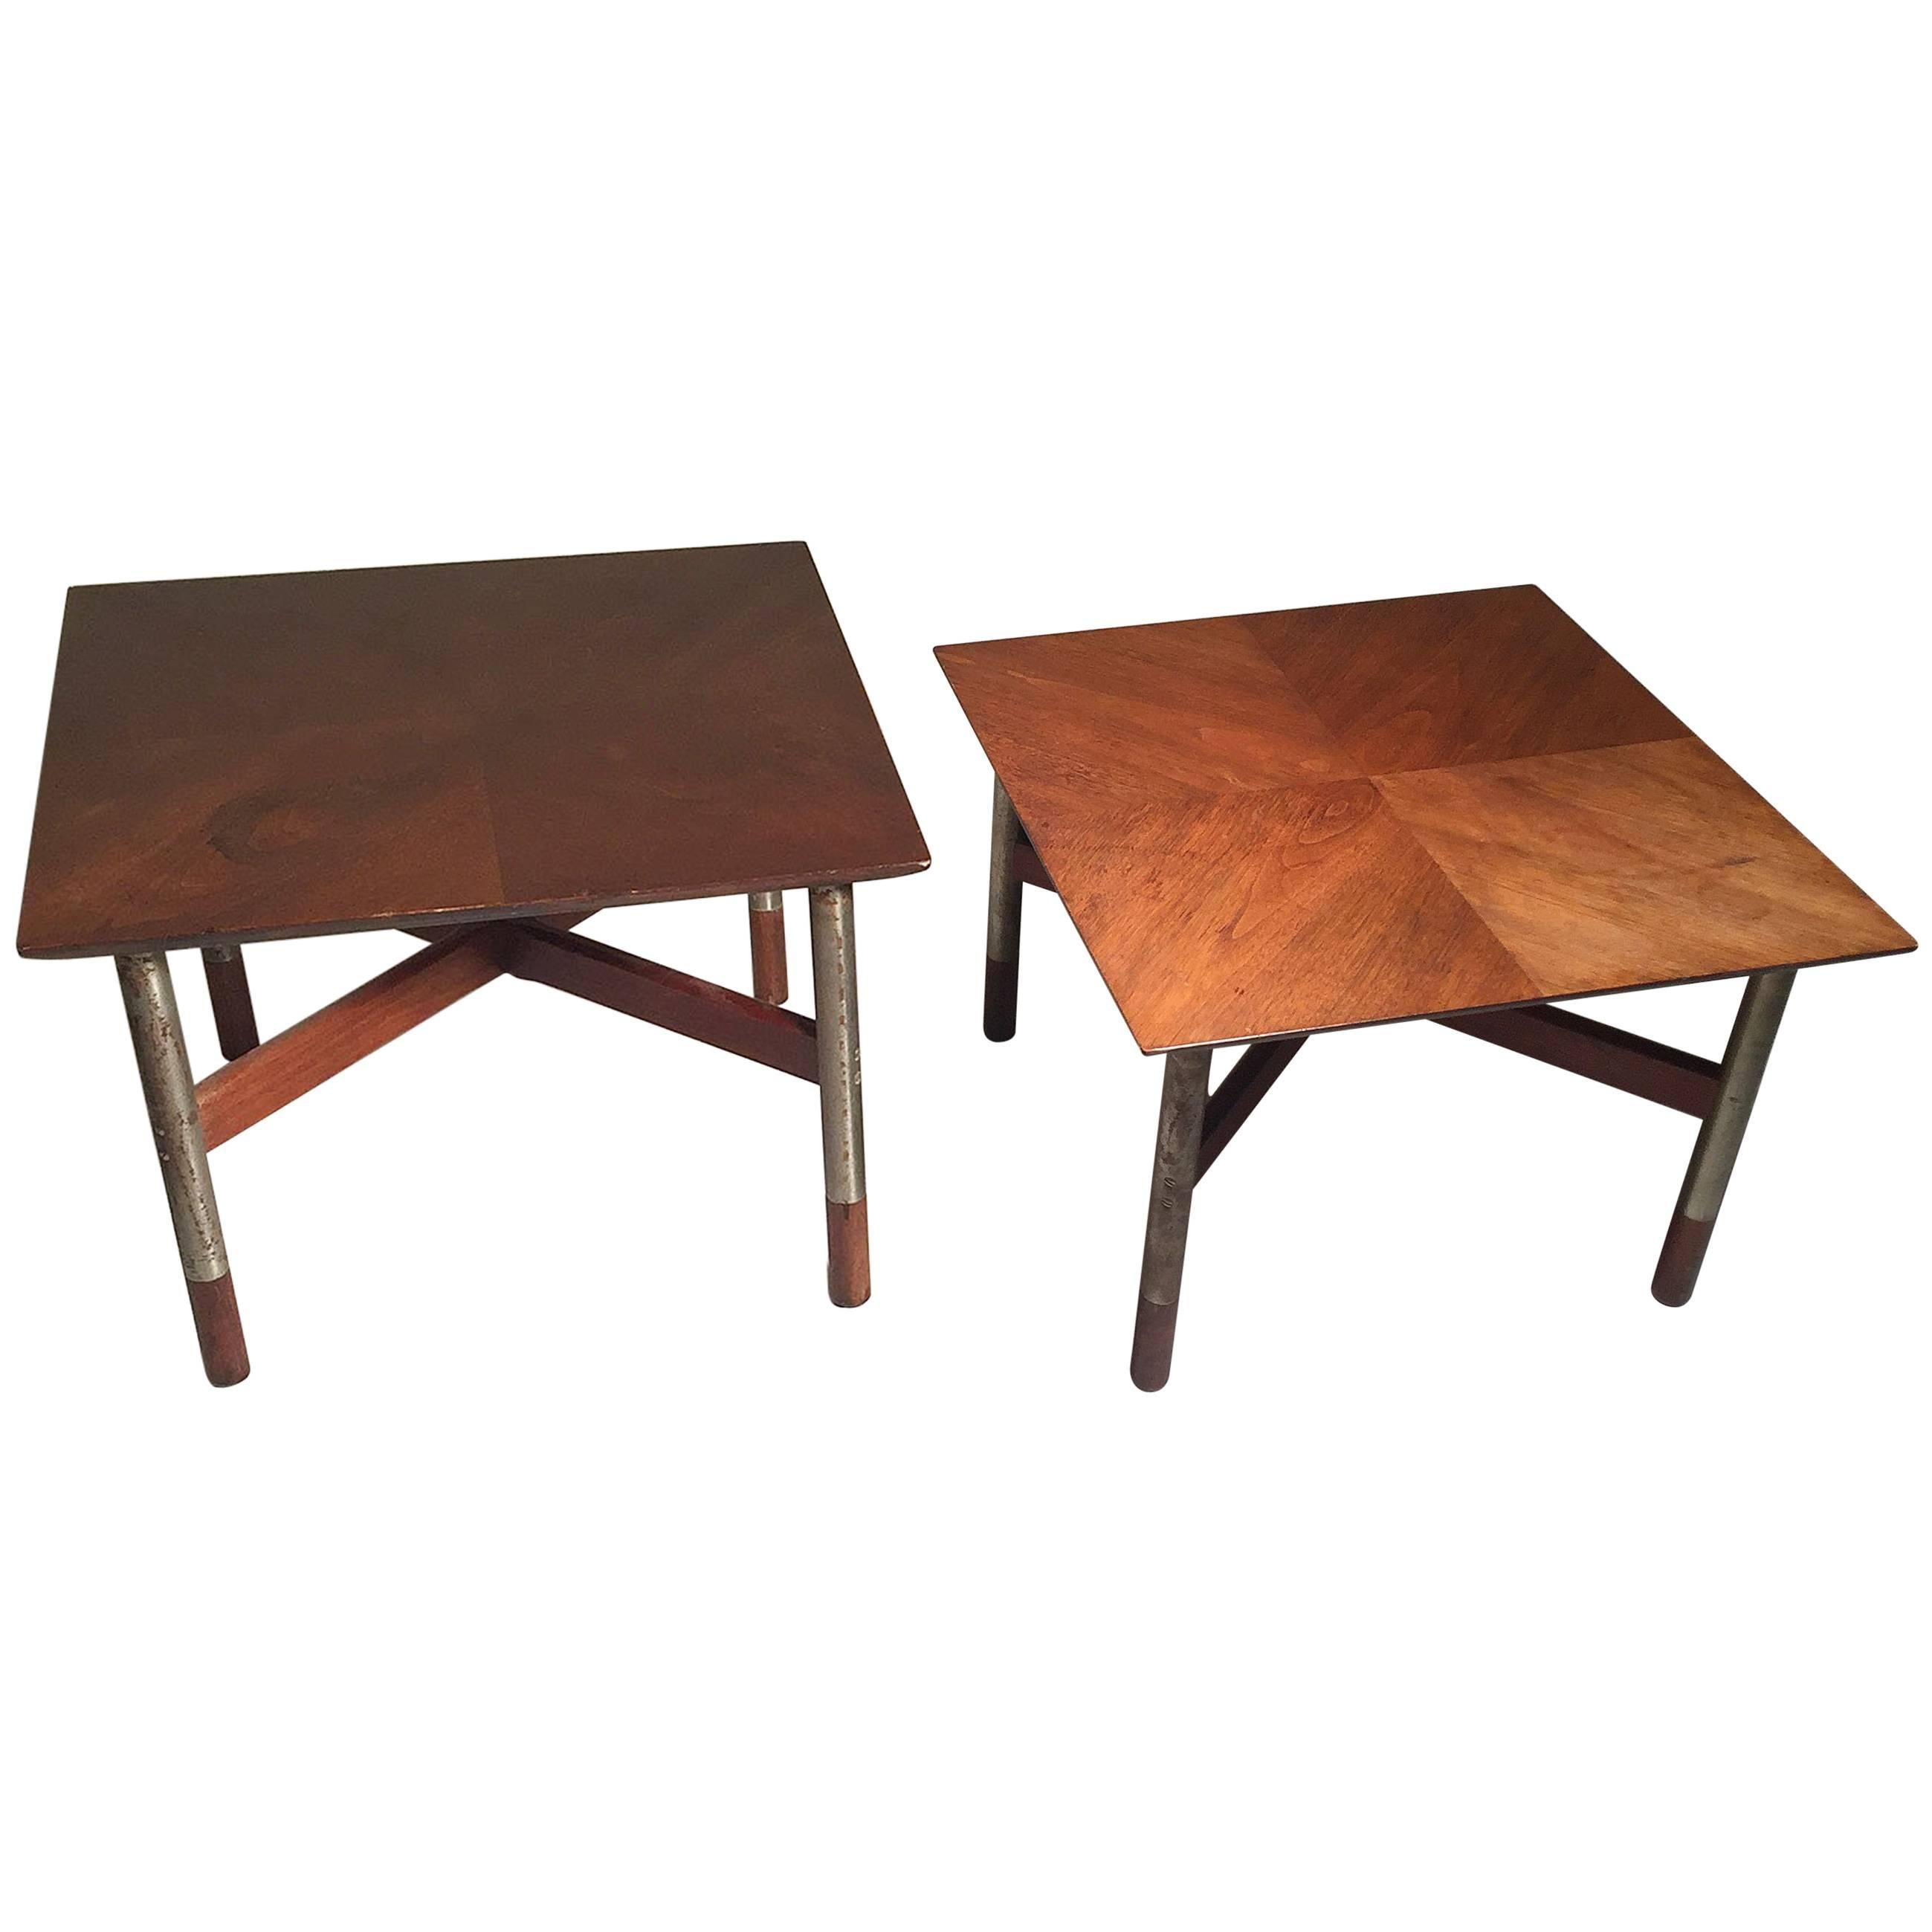 Mid-Century Walnut and Brushed Steel Pair of Tables by Jack Cartwright.  Model number printed on underside of one of them. Steel legs with teak-capped feet. Wood X-stretcher on each. 

In the manner of Finn Juhl , Arne Vodder and Milo Baughman